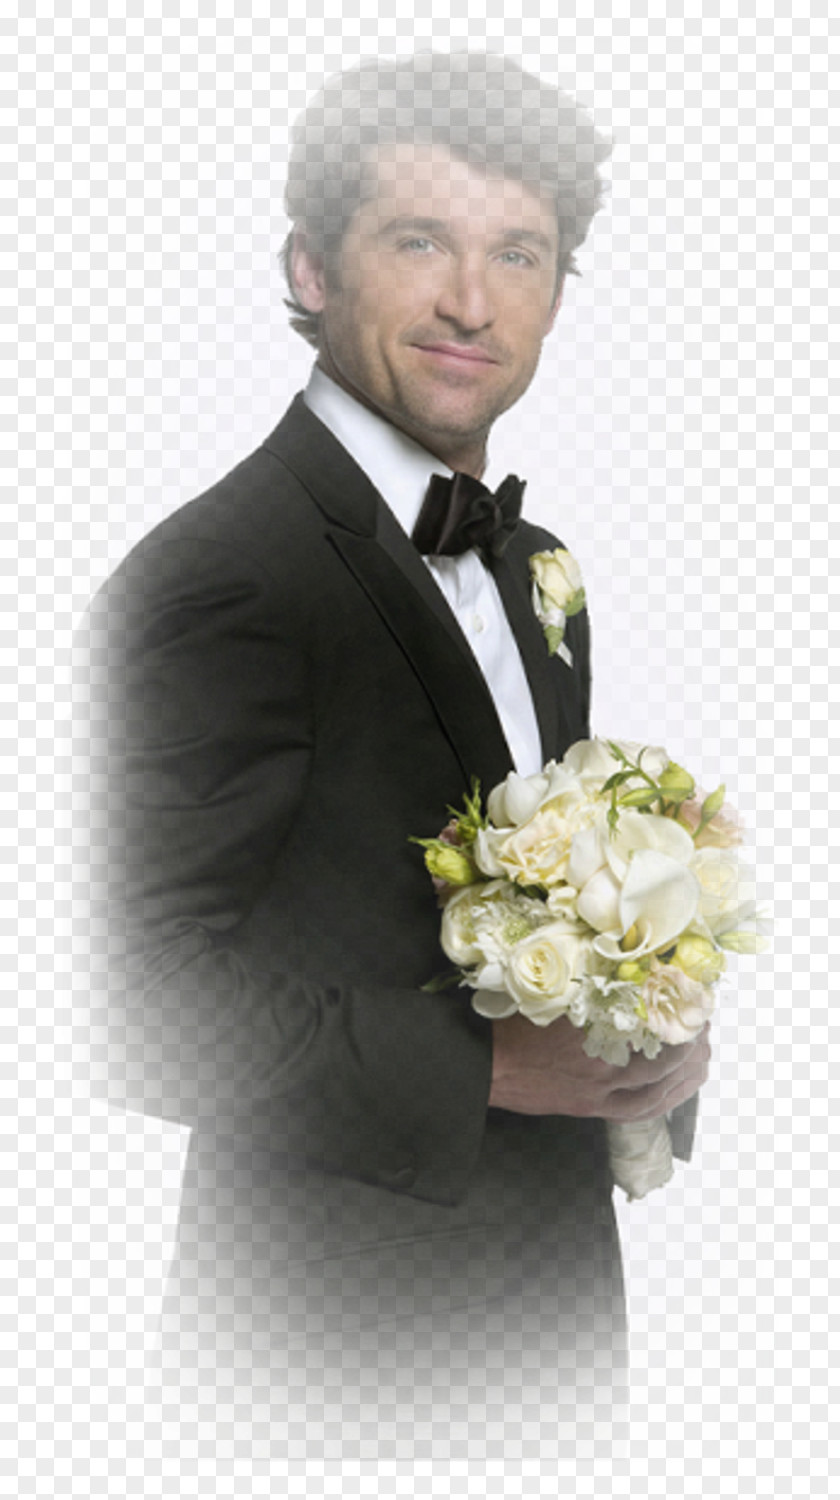 Actor Patrick Dempsey Made Of Honor Film Floral Design PNG